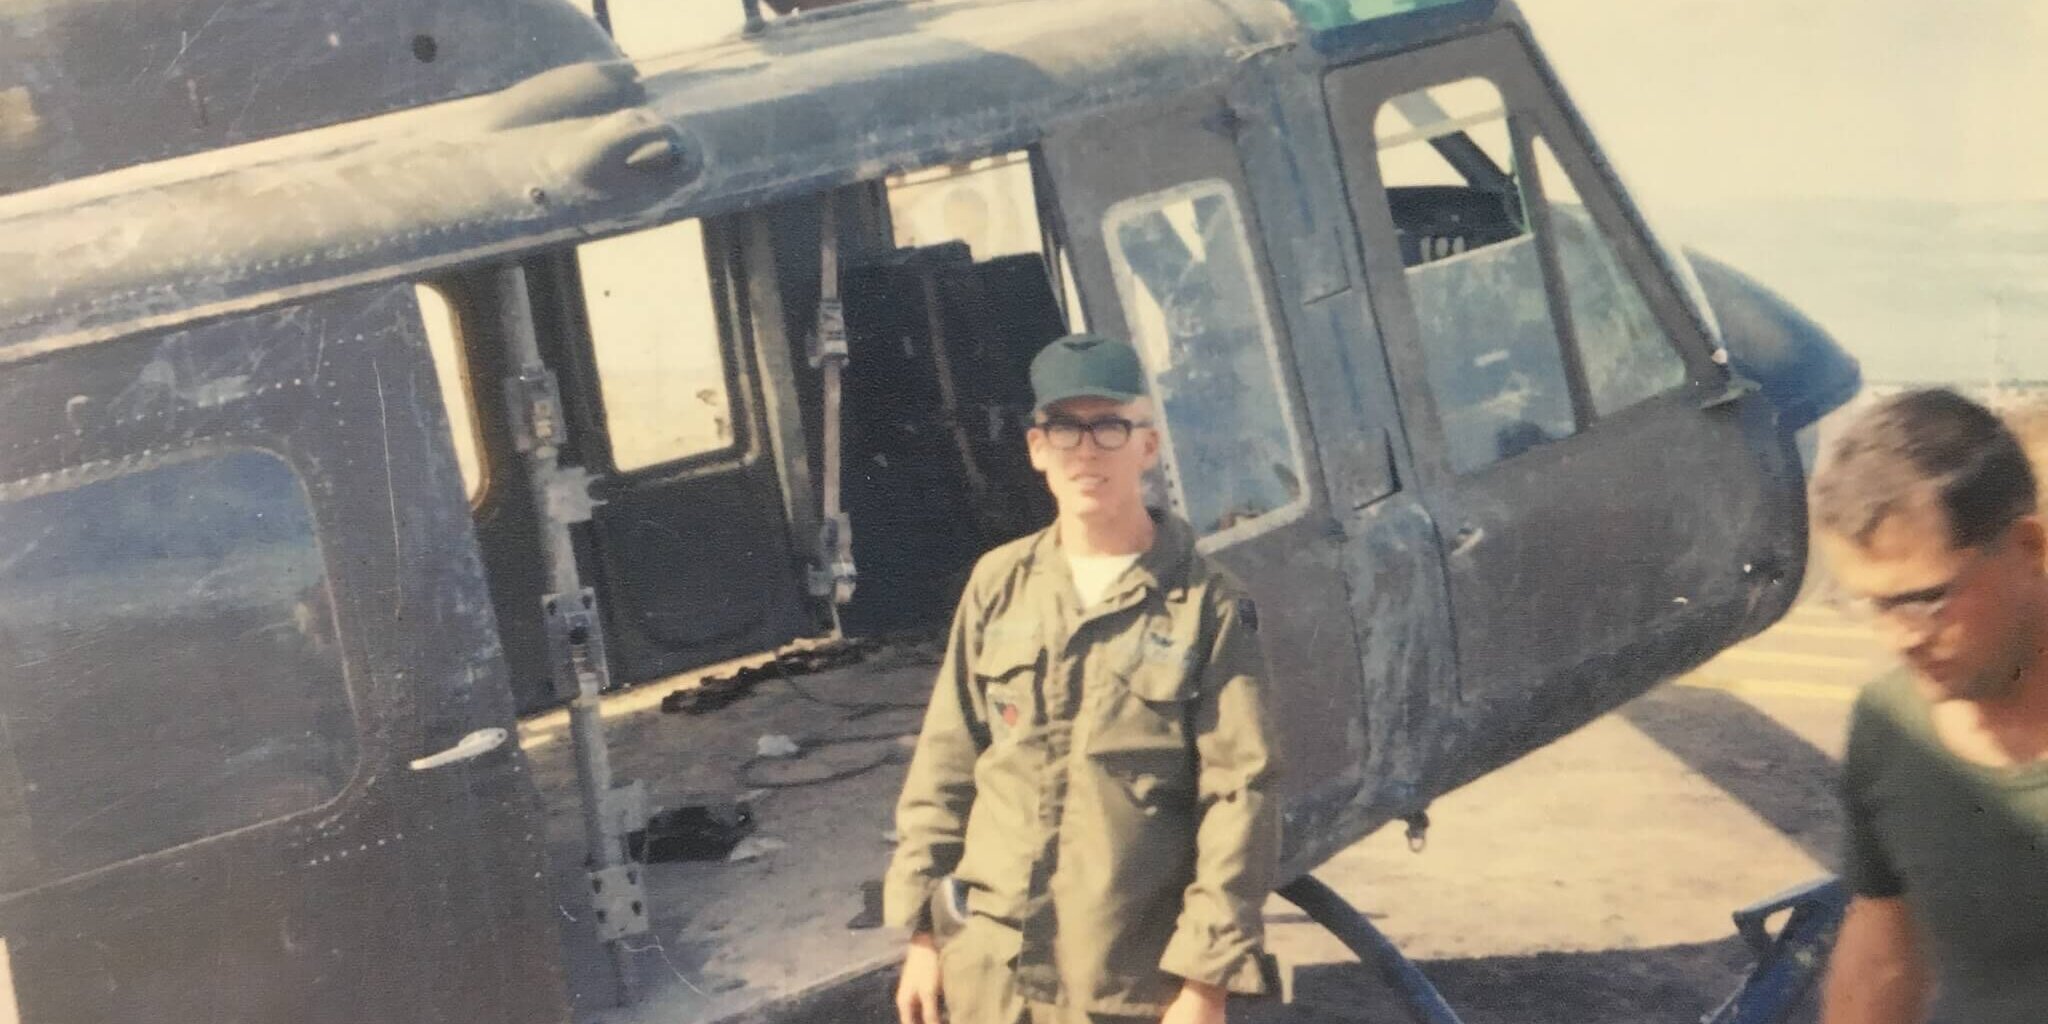 CA grandfather and veteran Paul Harpole, a Dust Off crew chief, with his Huey helicopter in Vietnam.